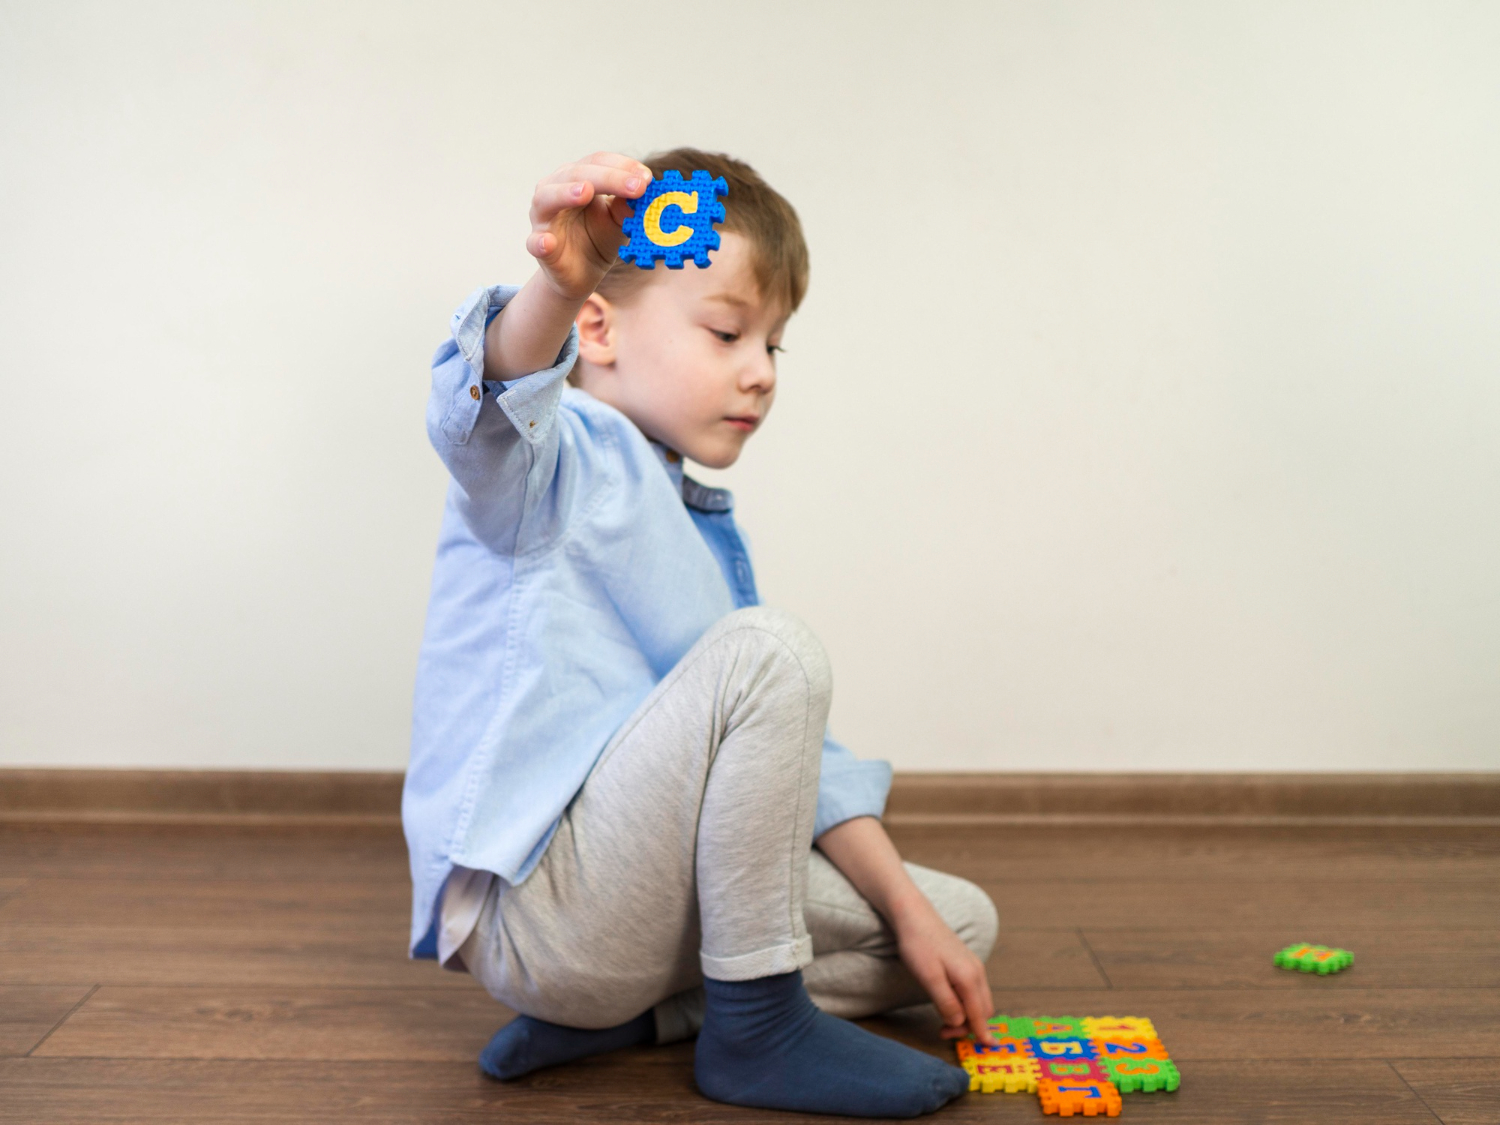 Floortime shares commonalities with play therapy but emphasizes expanding 'circles of communication' with autistic children